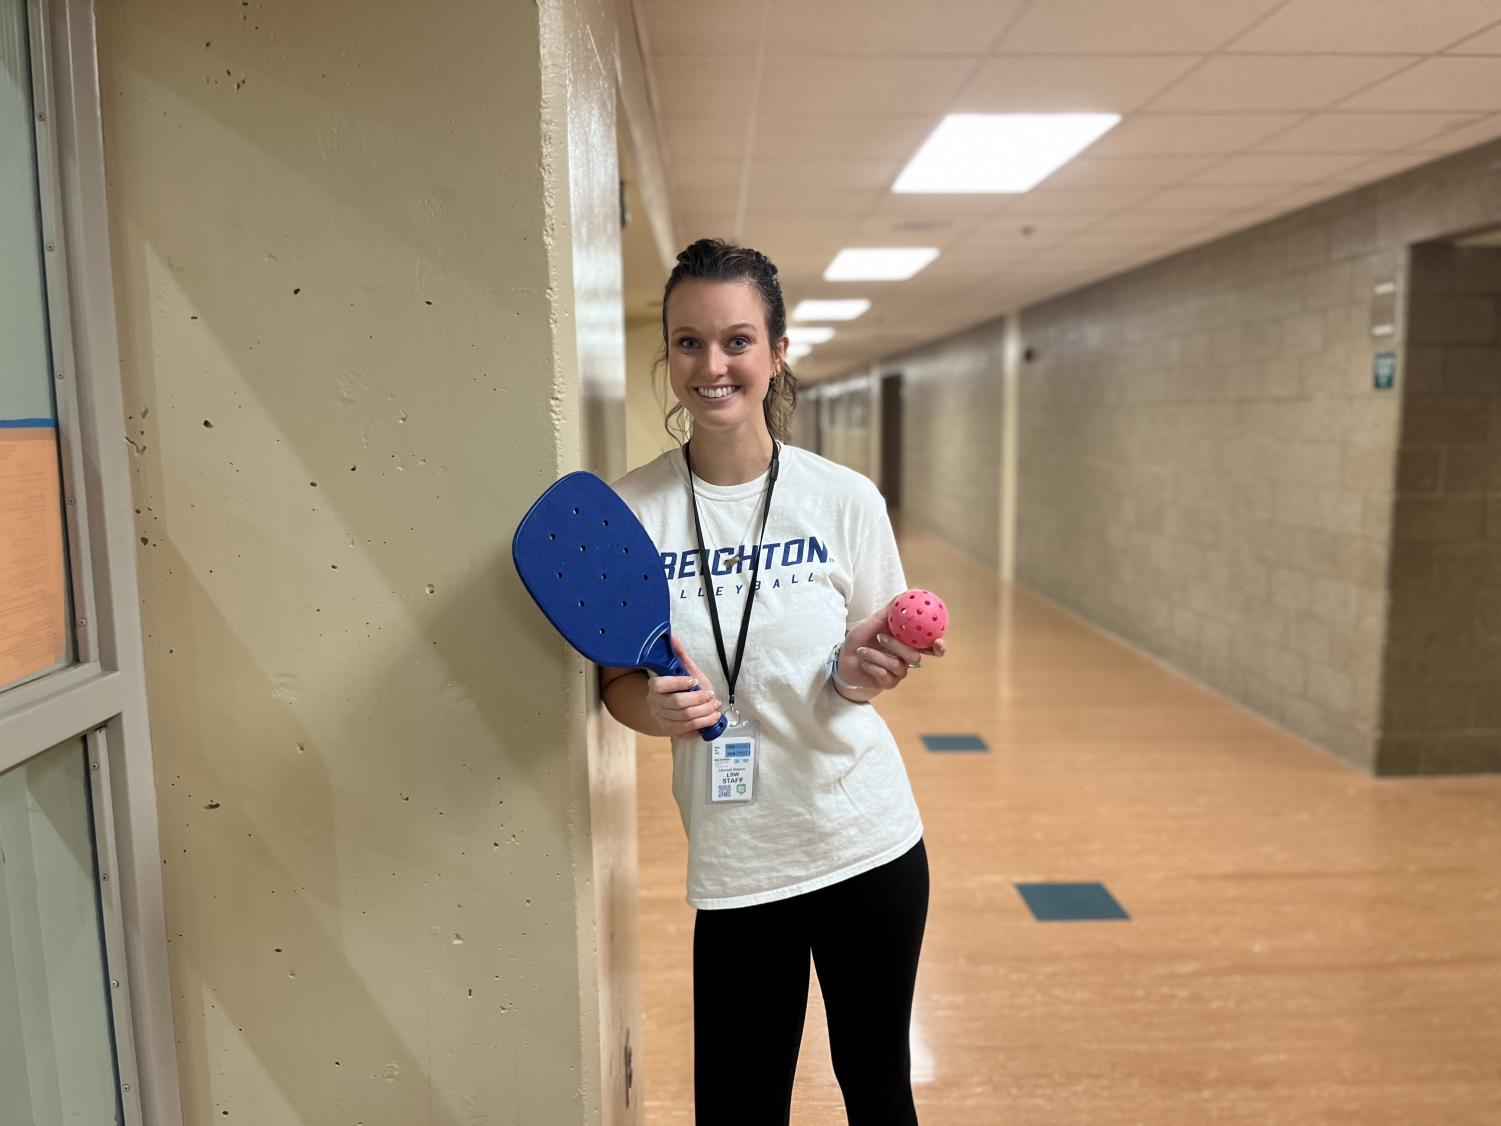 Ms. Sexton is the new Physical Education teacher. This is her third year of teaching but first year at LSW.